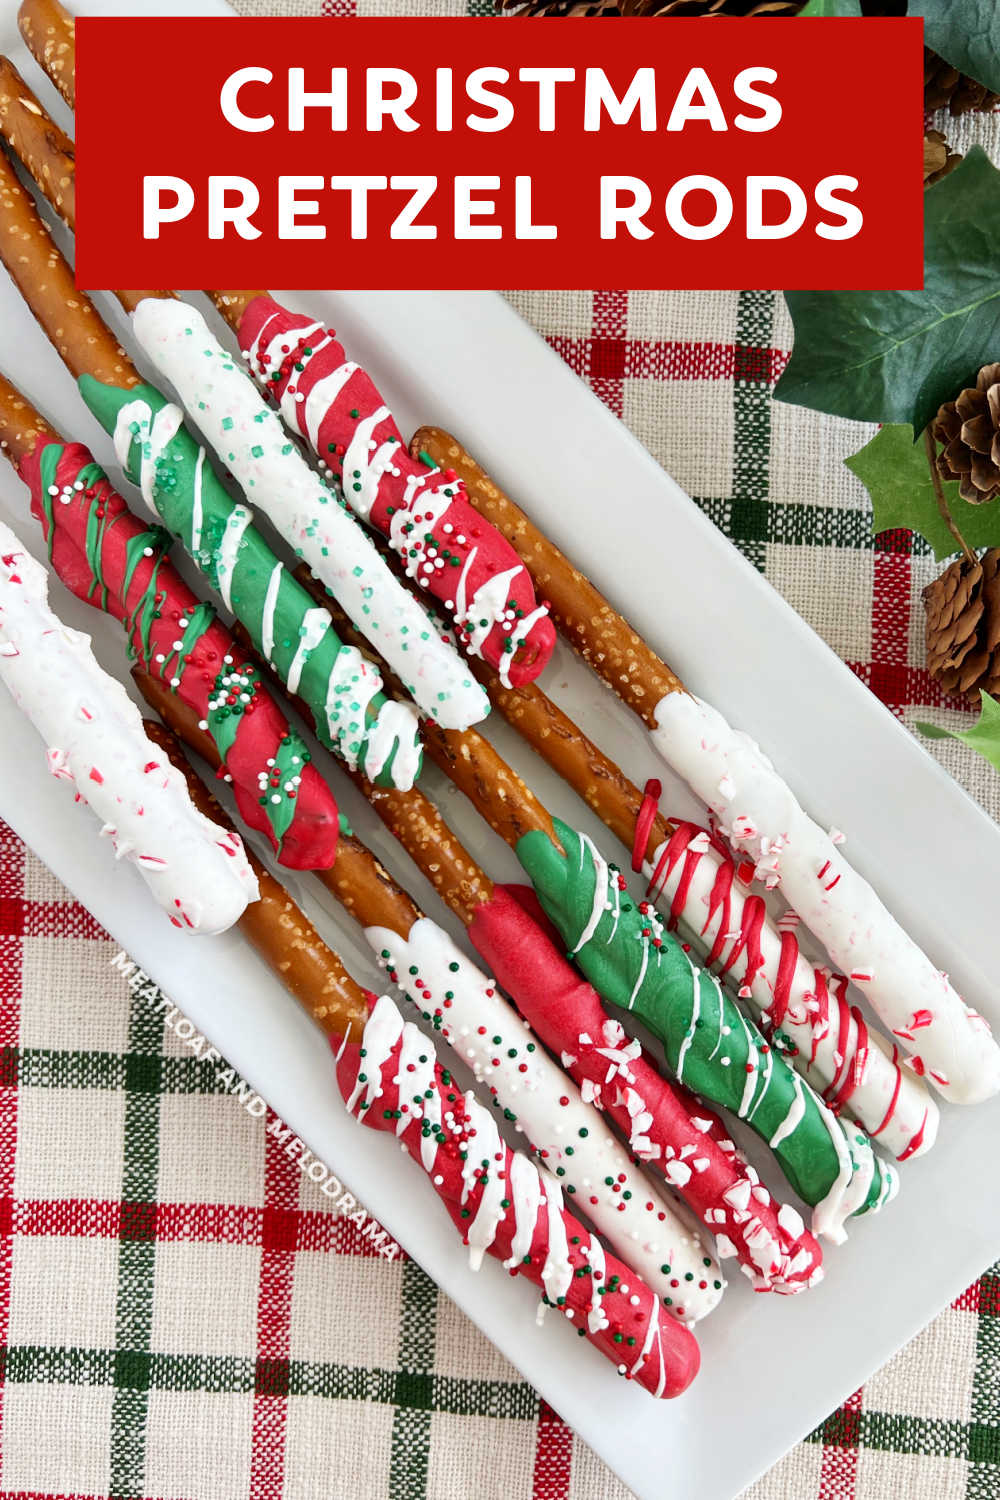 This Christmas Pretzel Rods Recipe uses salty pretzel rods covered in melted chocolate or candy coating to make easy Christmas treats. These no-bake treats are perfect to share during the holiday season! via @meamel